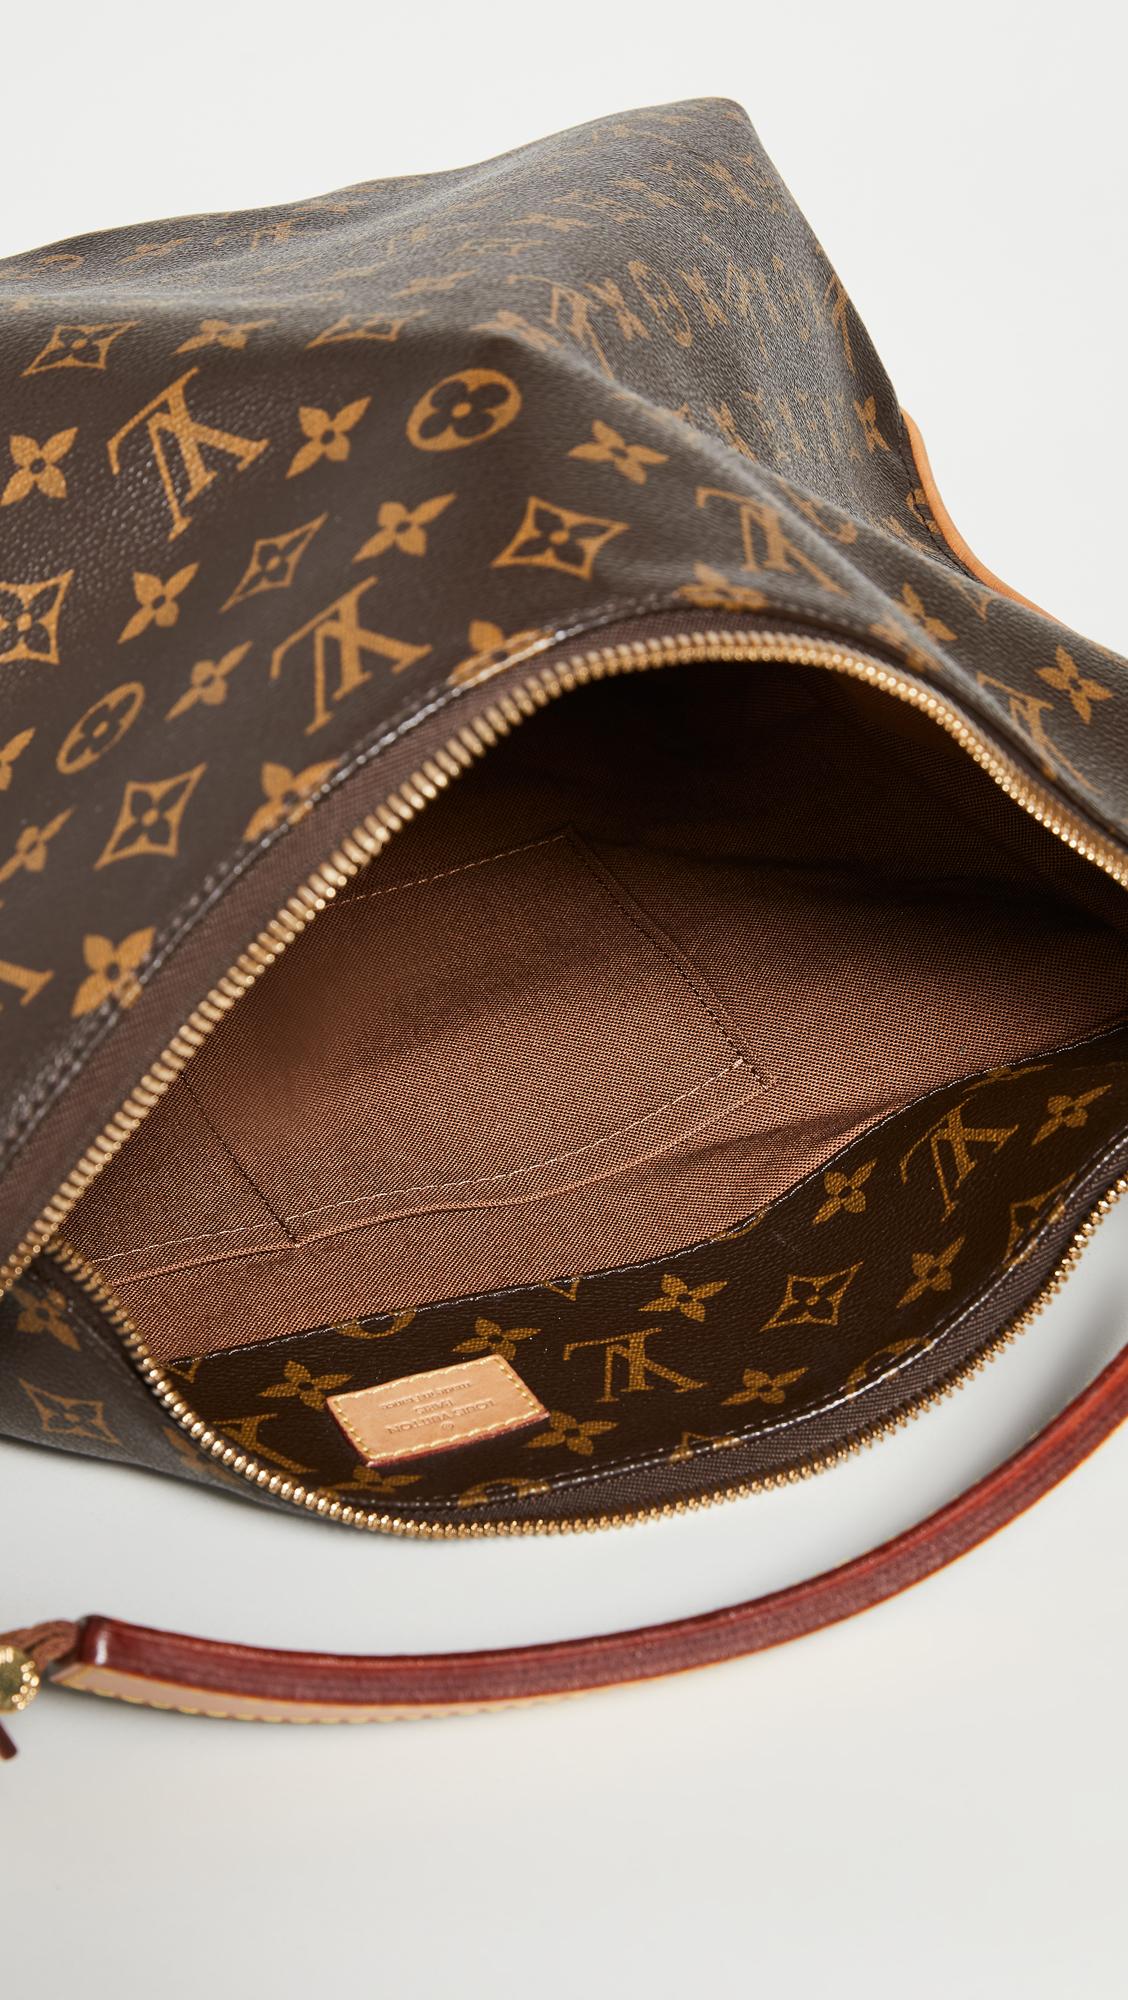 What Goes Around Comes Around Louis Vuitton Monogram Sully PM Hobo